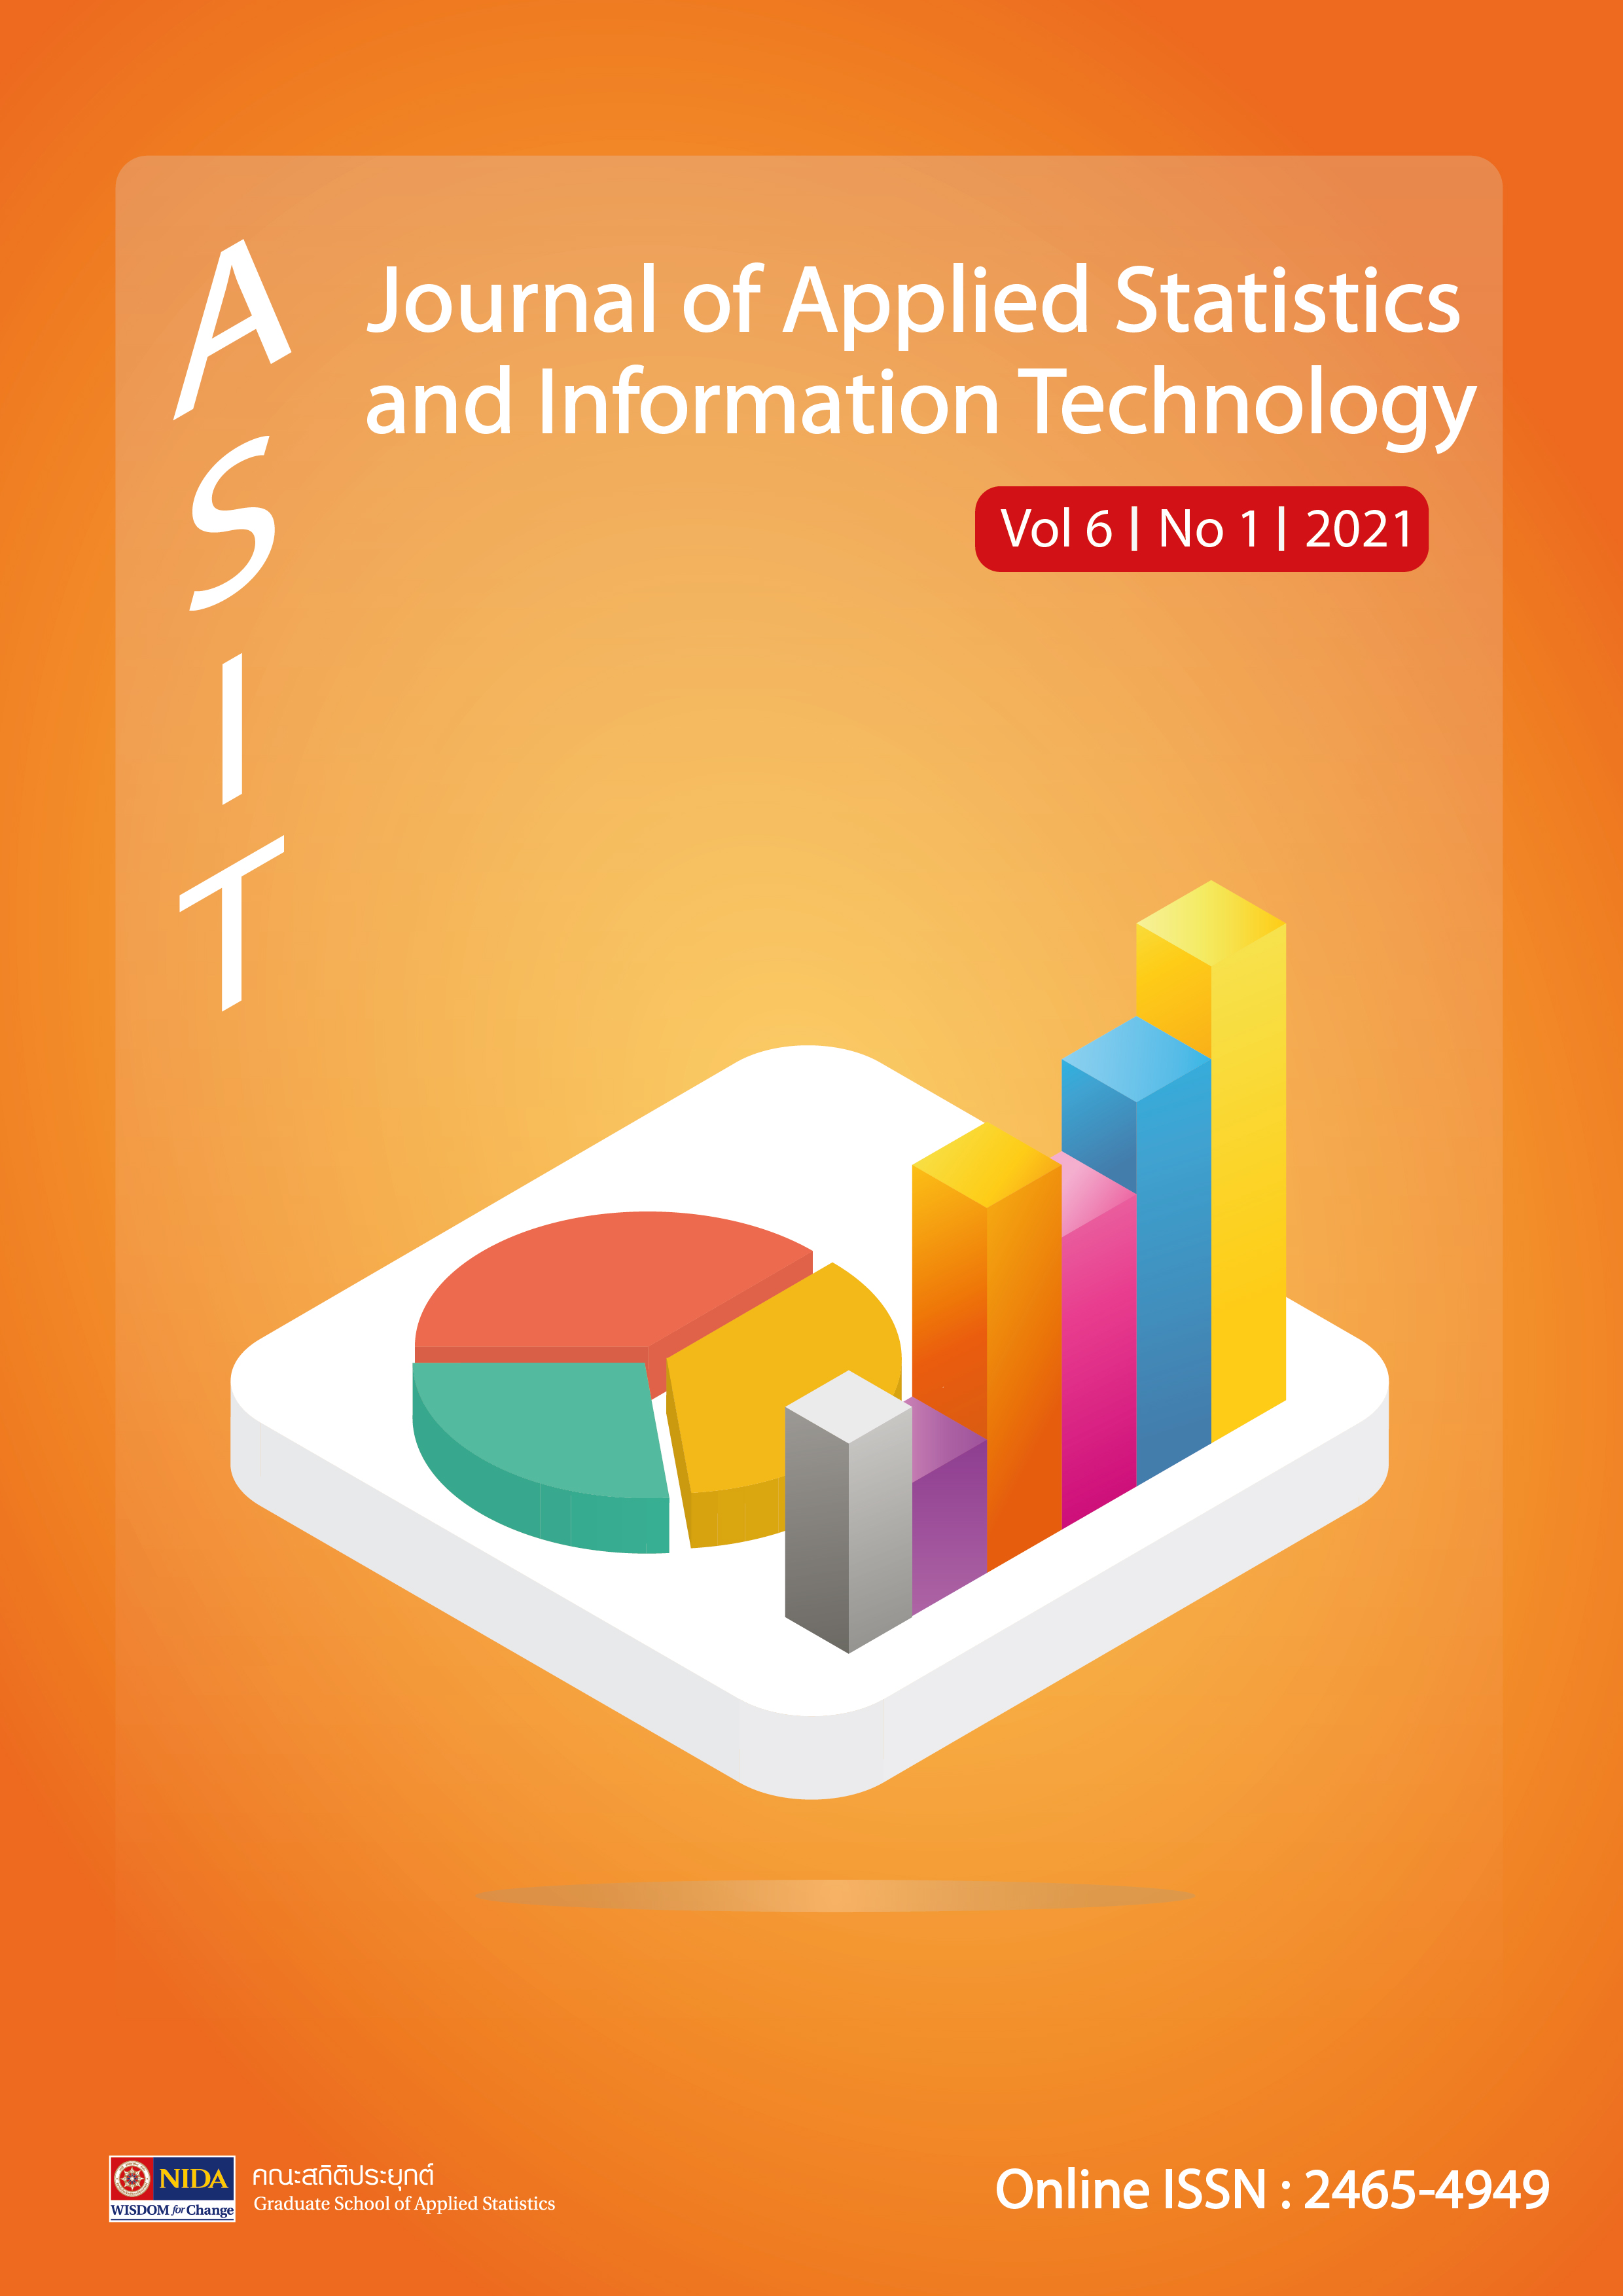 					View Vol. 6 No. 1 (2021): Journal of Applied Statistics and Information Technology Vol 6 No 1 (January - June 2021)
				